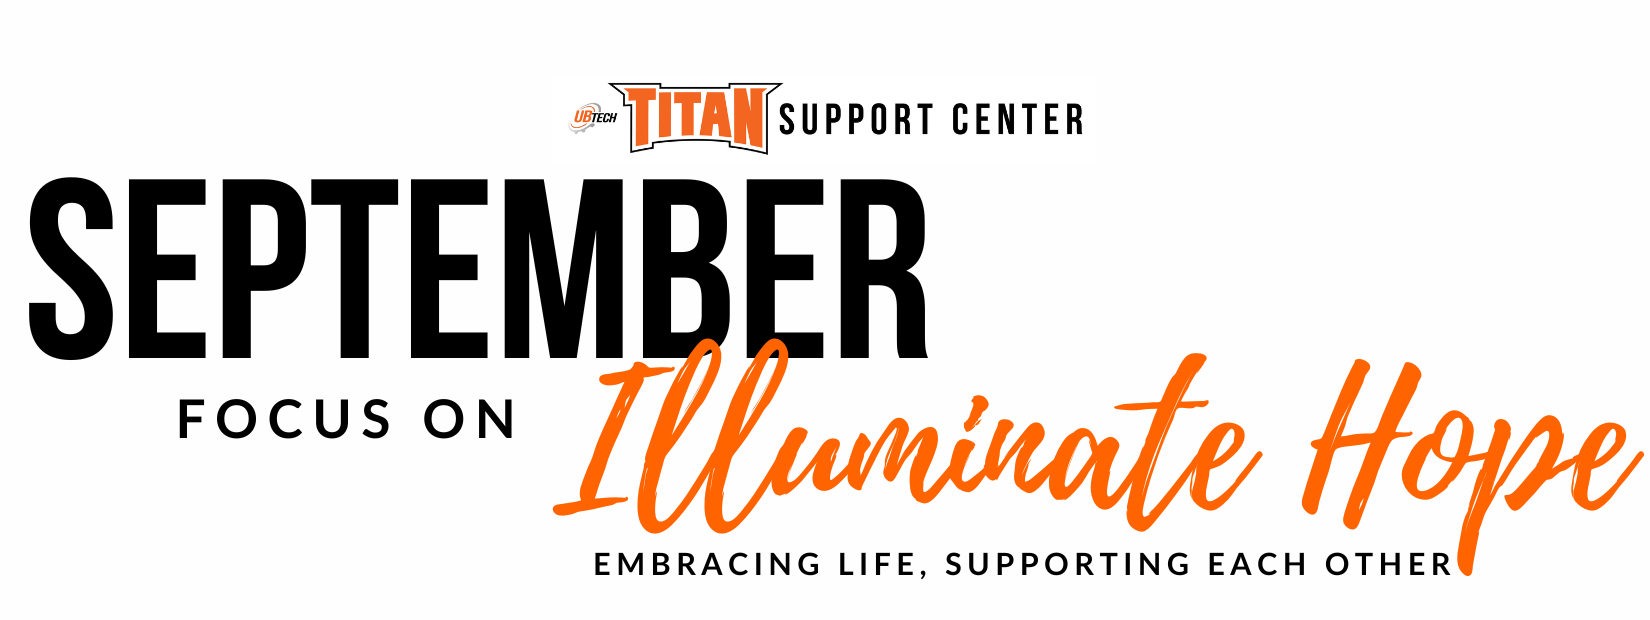 Titan Support Center - September Focus on: Illuminate Hope. Embracing life and supporting eachother